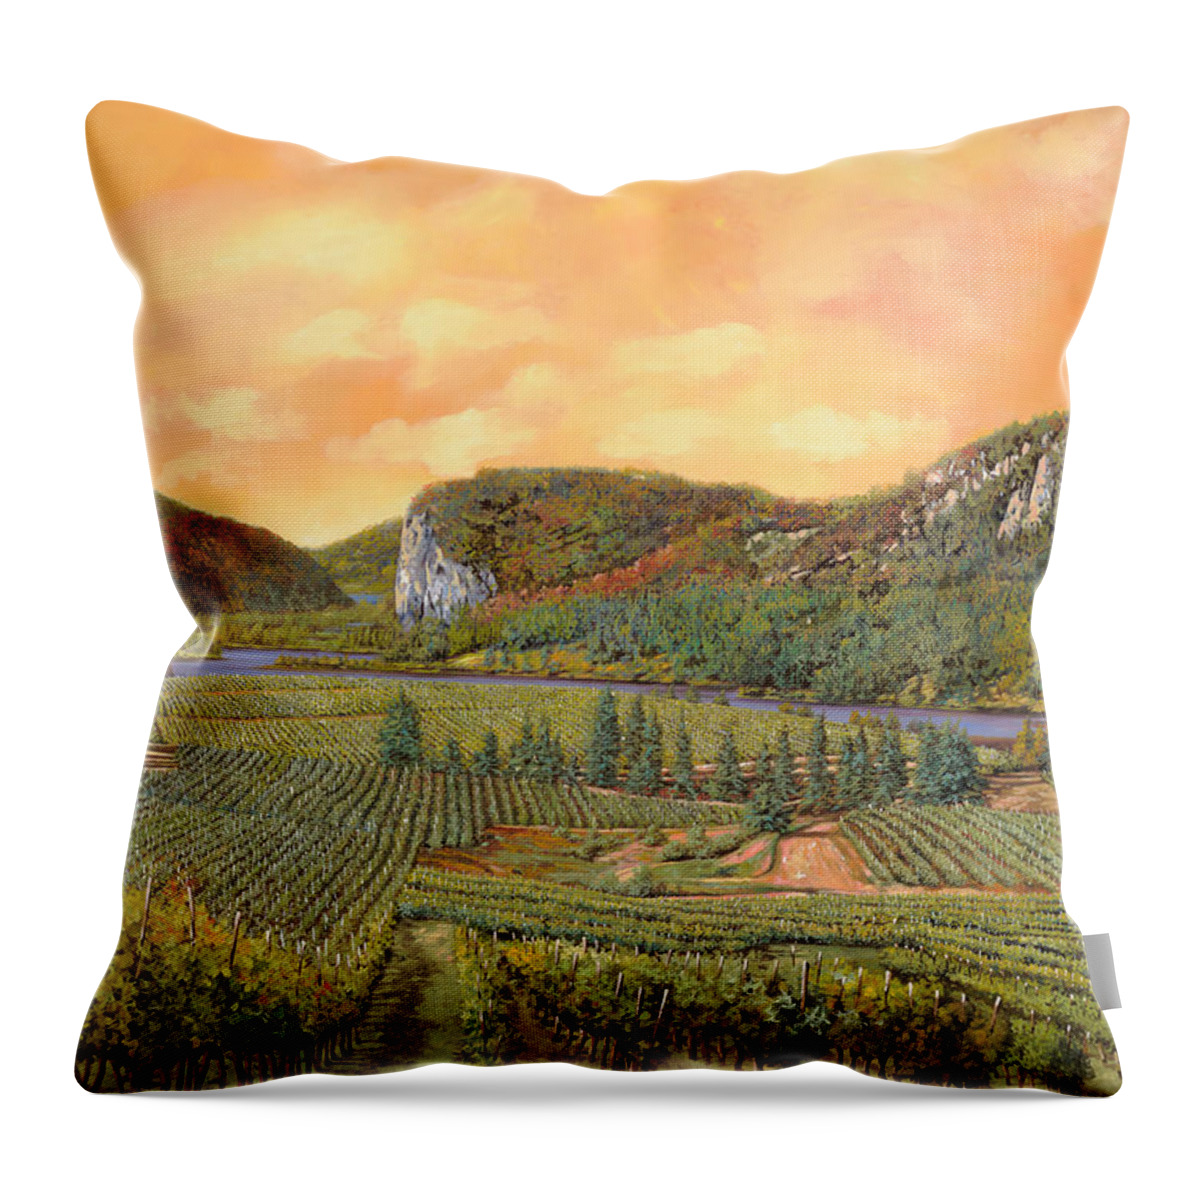 Vineyard Throw Pillow featuring the painting Le Vigne Nel 2010 by Guido Borelli